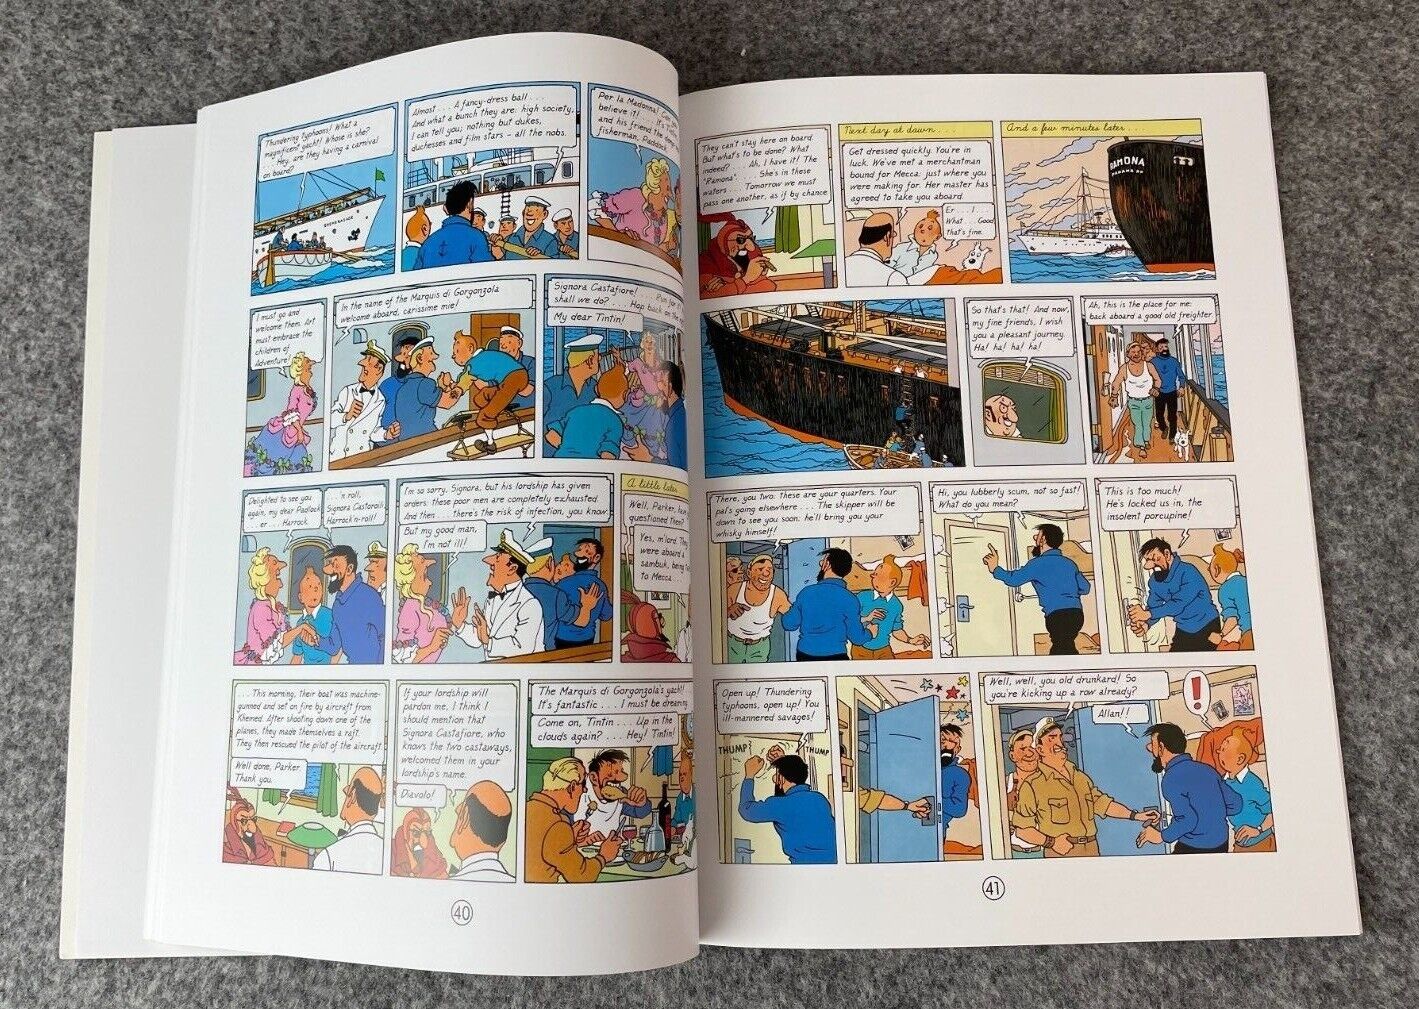 The Red Sea Sharks Tintin Book Egmont UK Paperback Edition